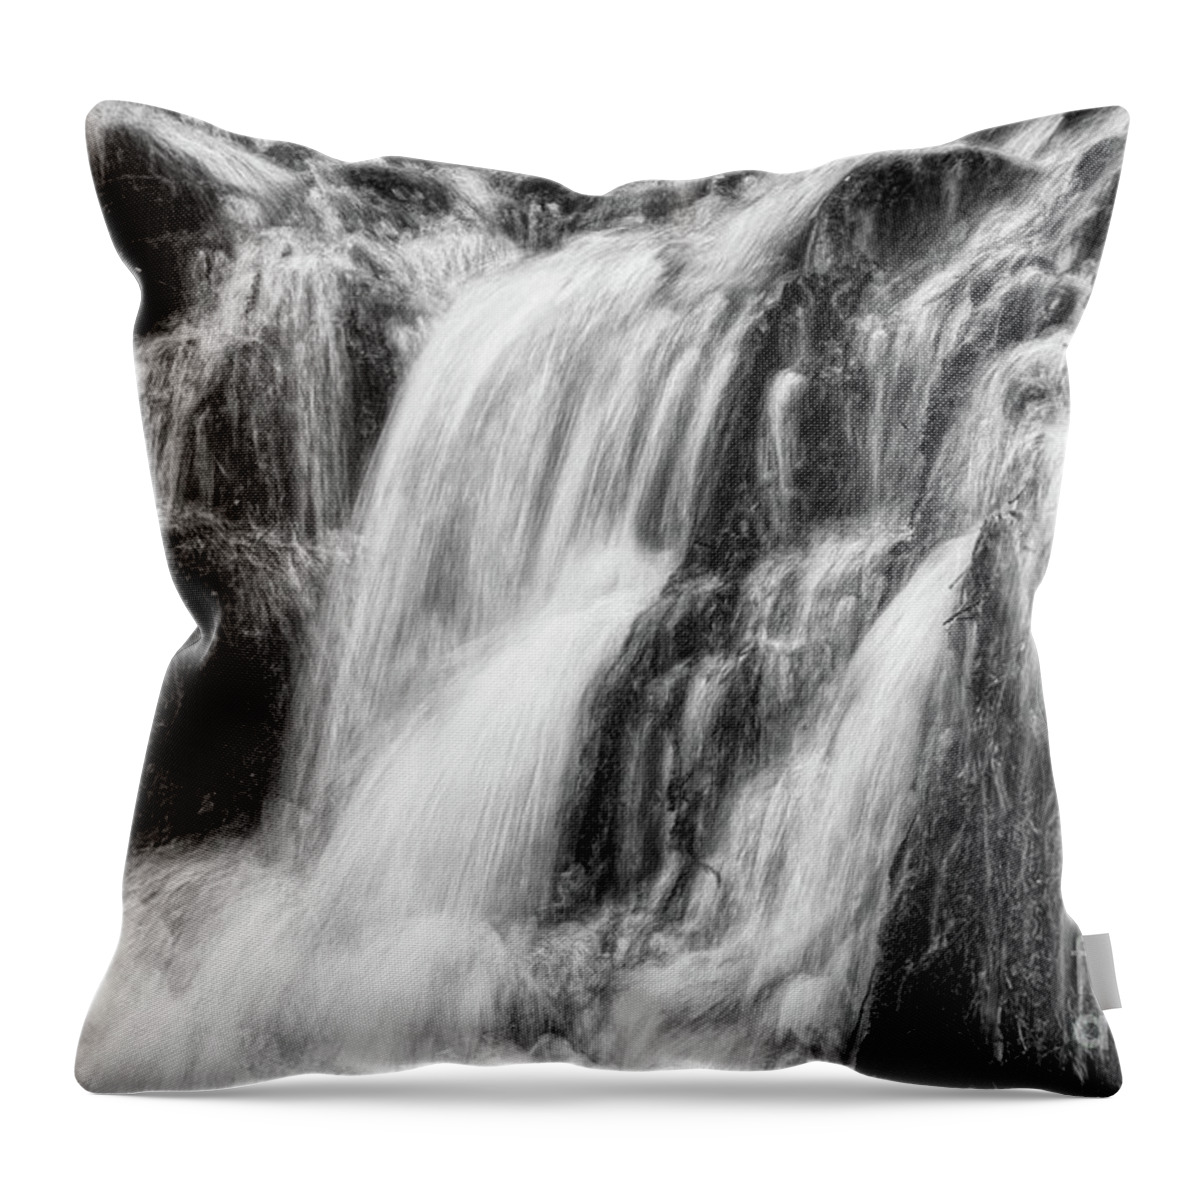 Black And White Throw Pillow featuring the photograph Rushing Water #2 by Phil Perkins